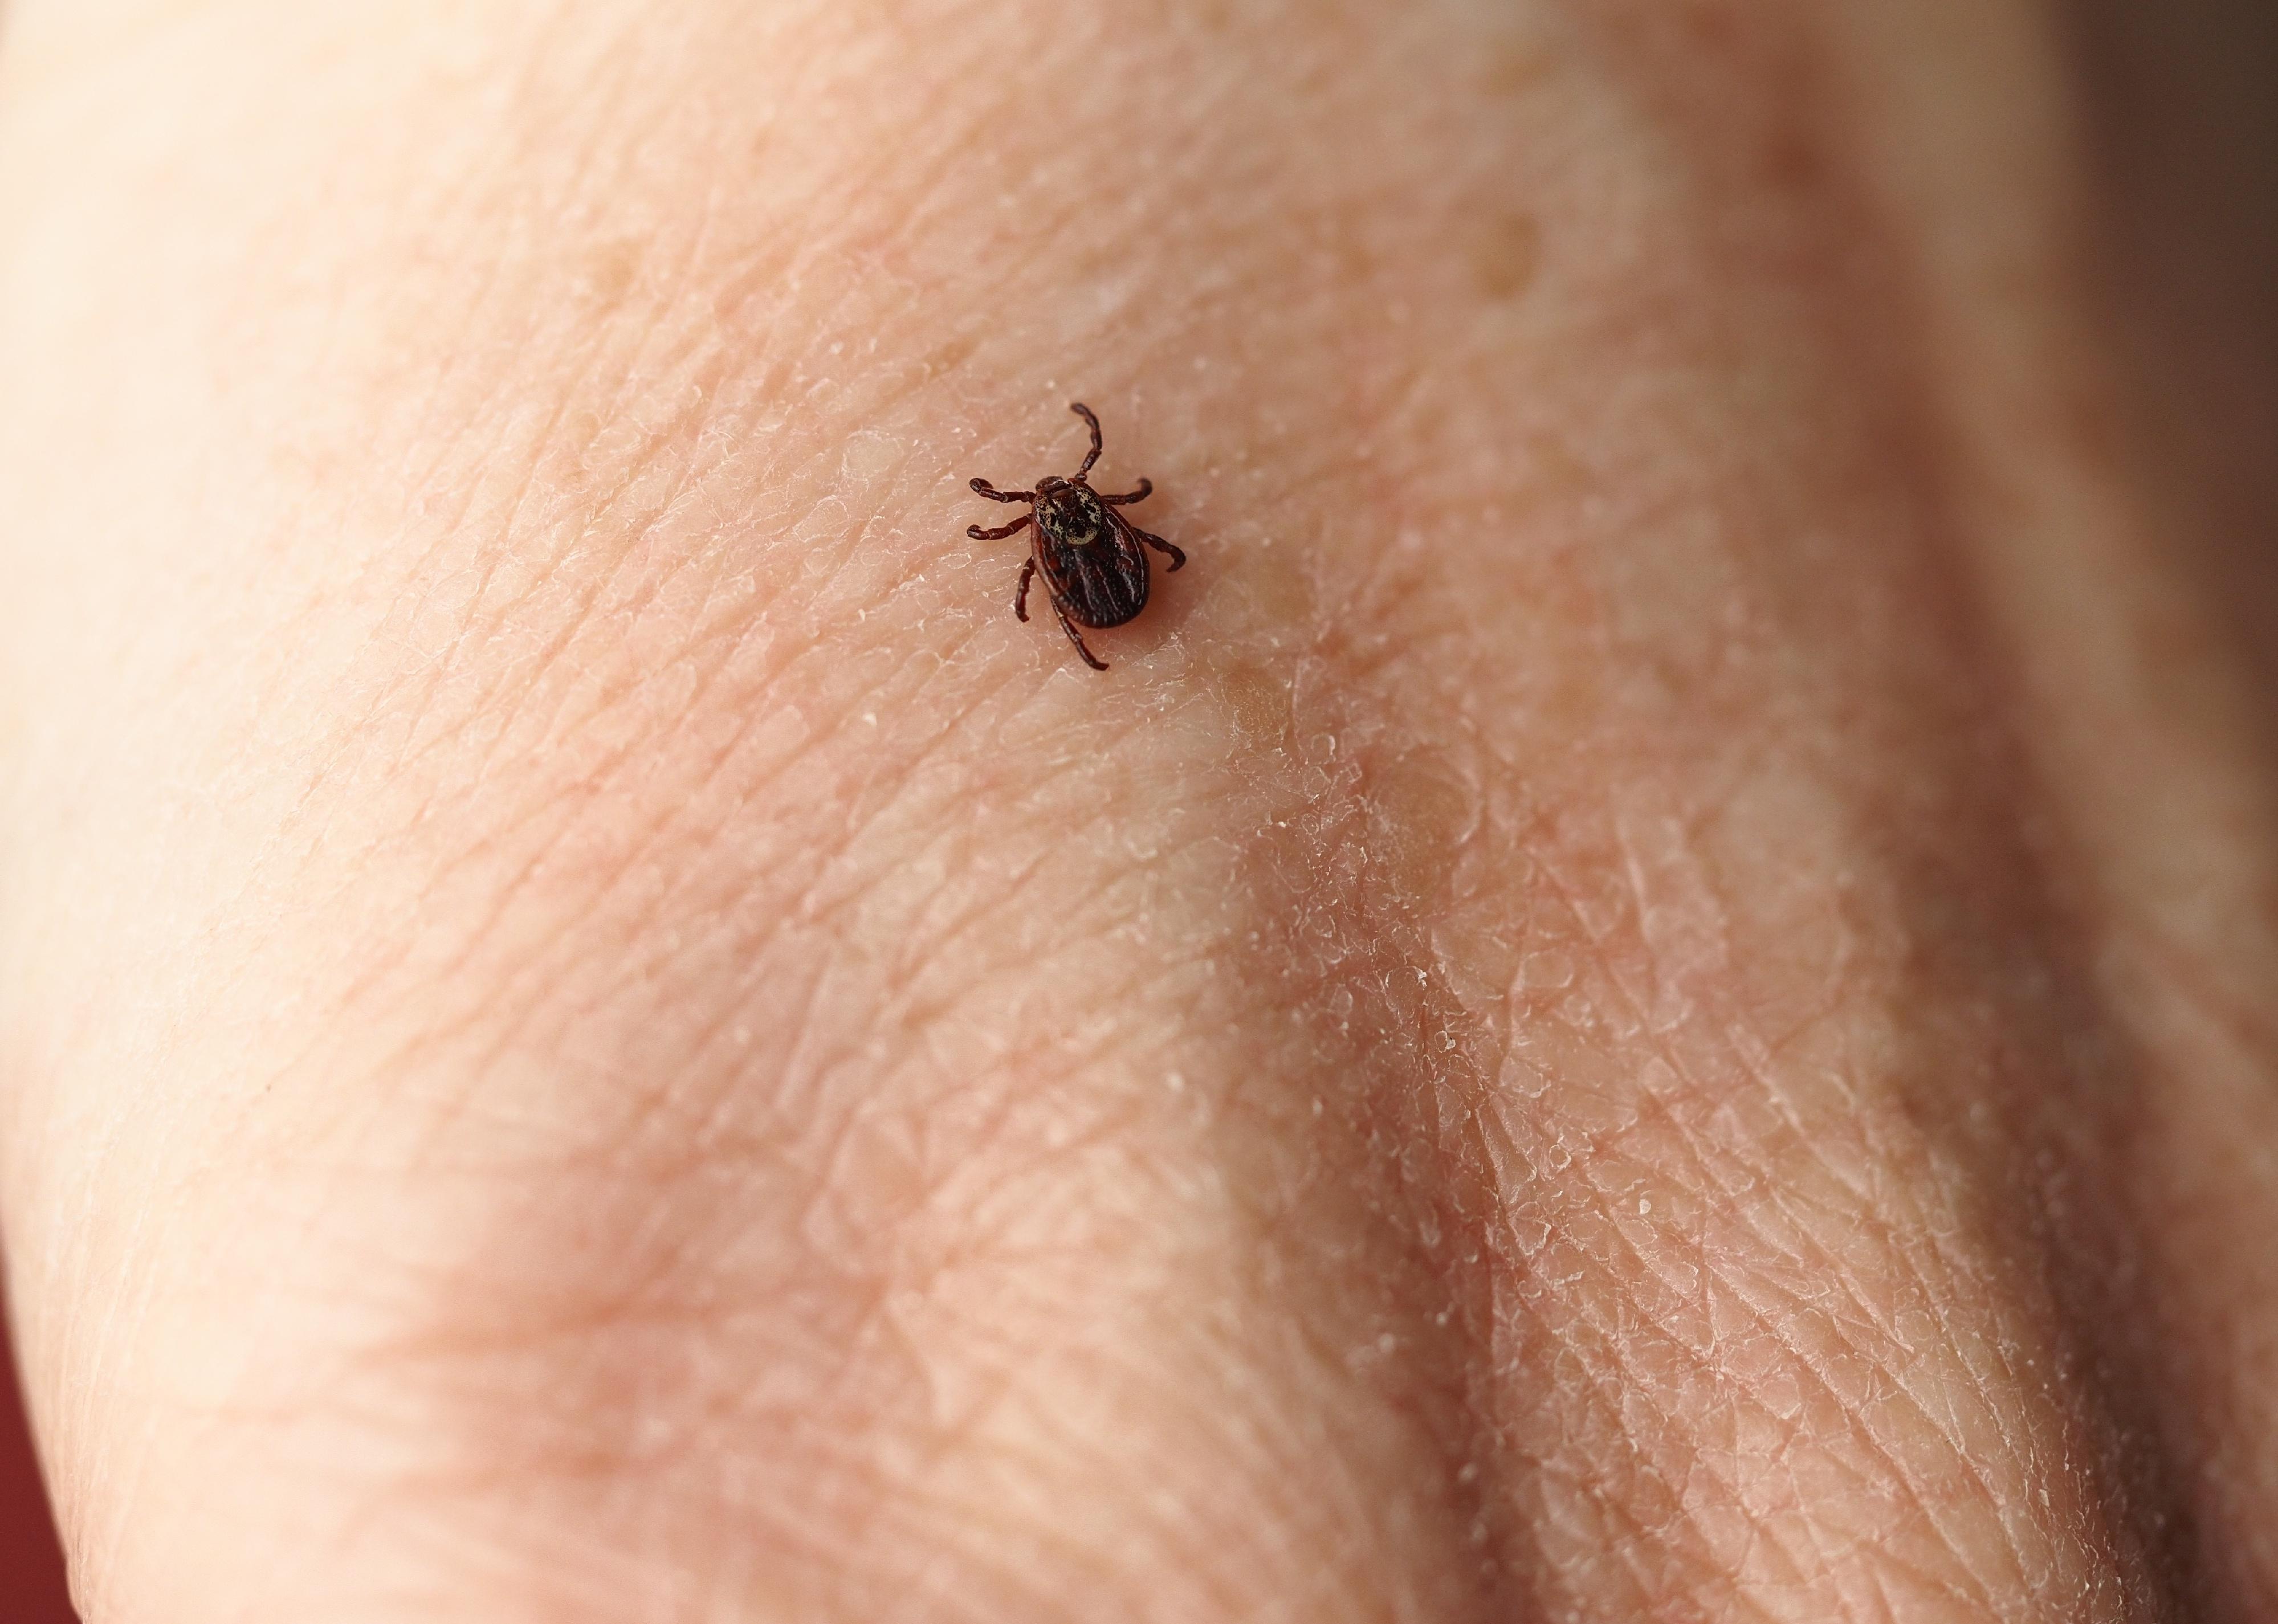 Close-up of an encephalitic live tick on the human body.